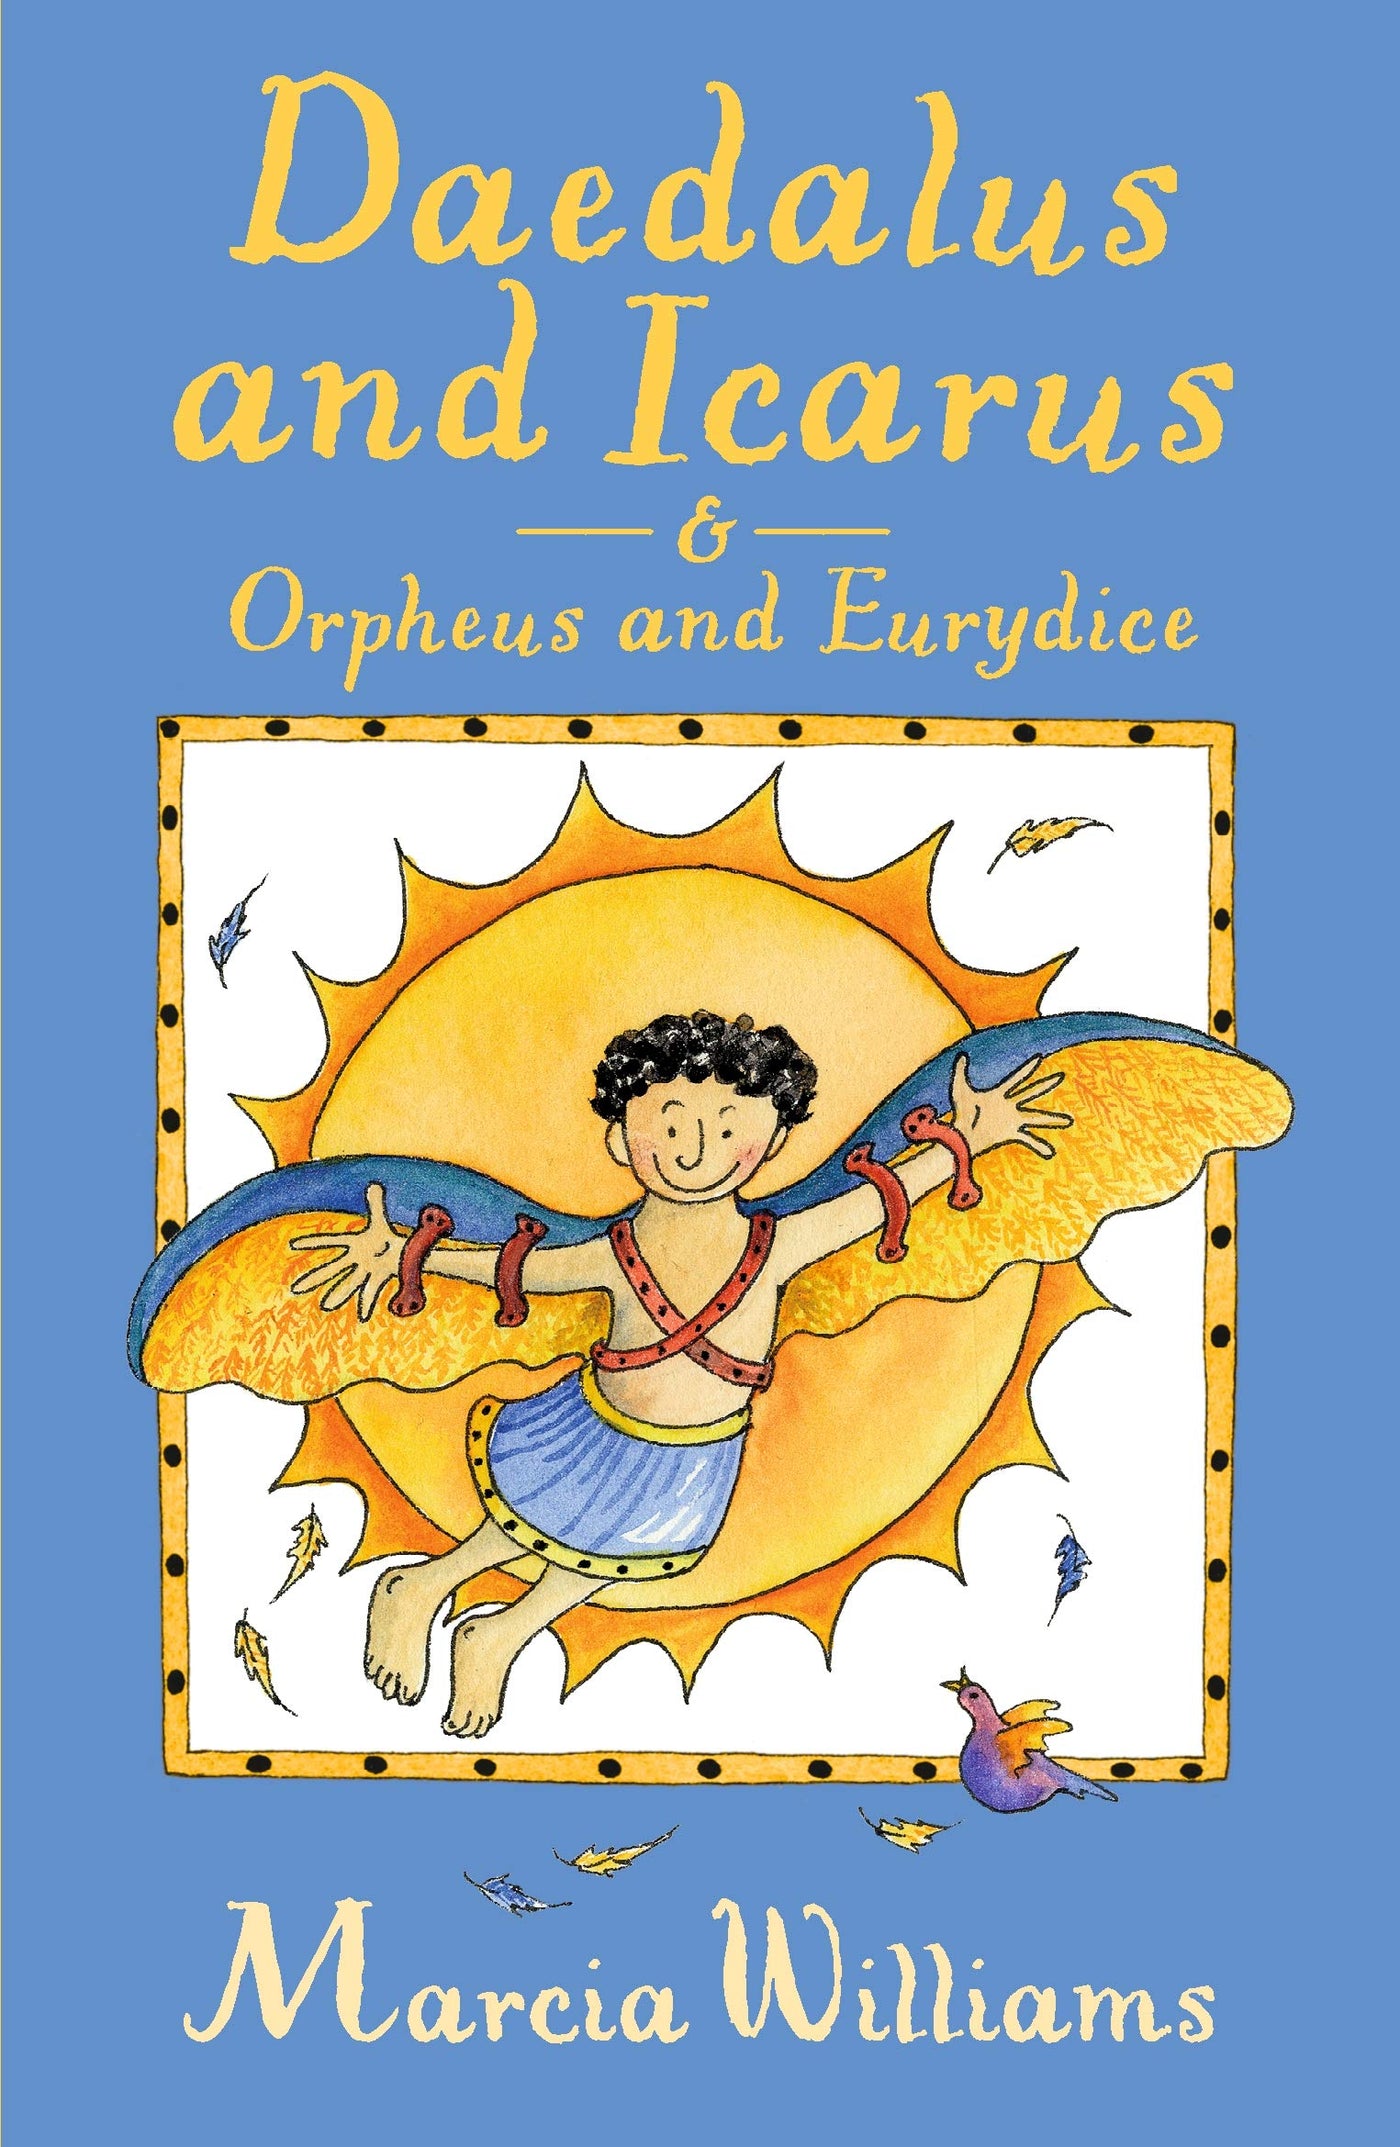 Daedalus and Icarus and Orpheus and Eurydice: 1 (Greek Myths Readers)